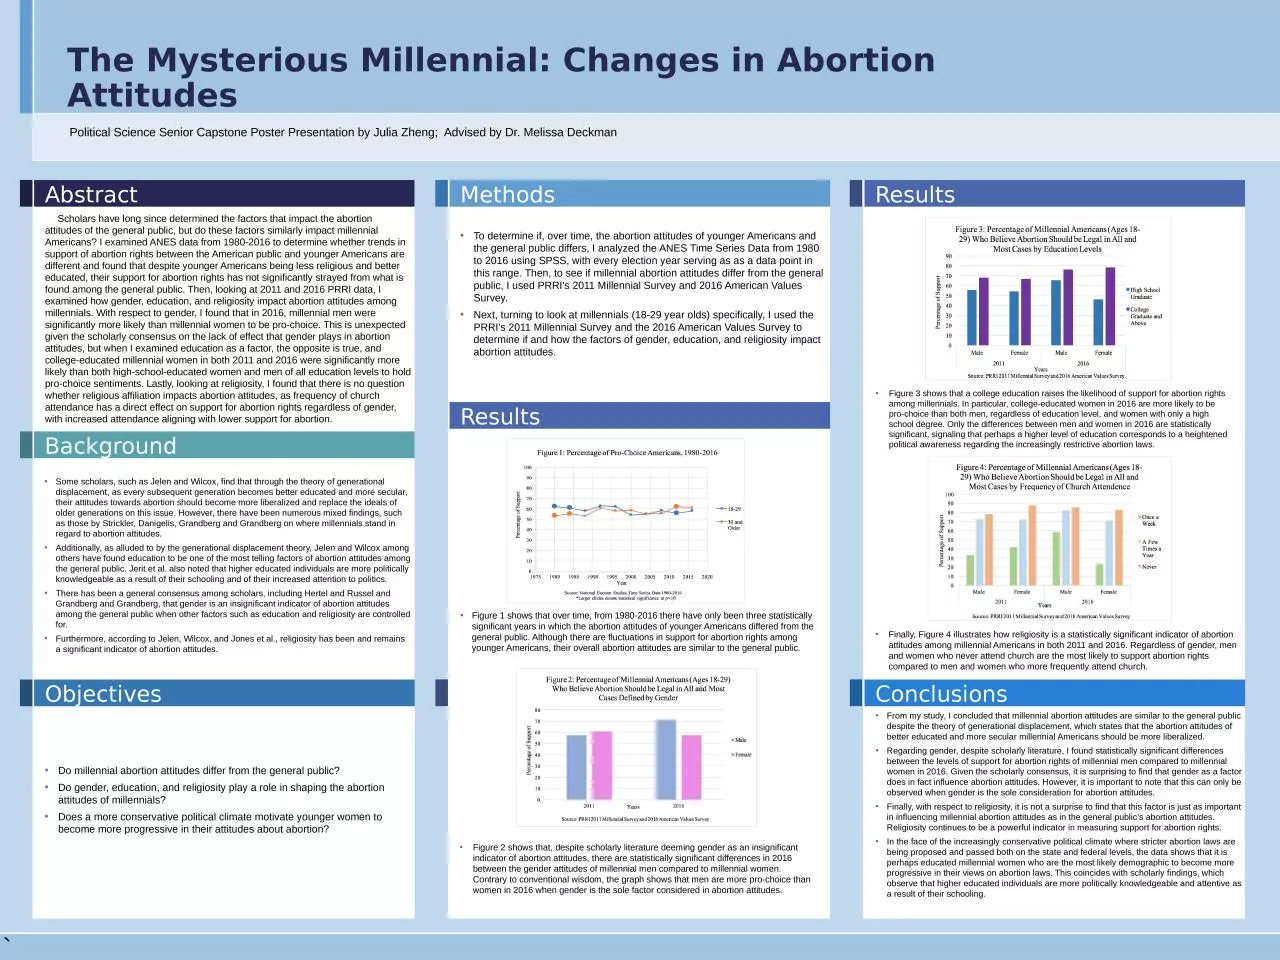 The Mysterious Millennial: Changes in Abortion Attitudes